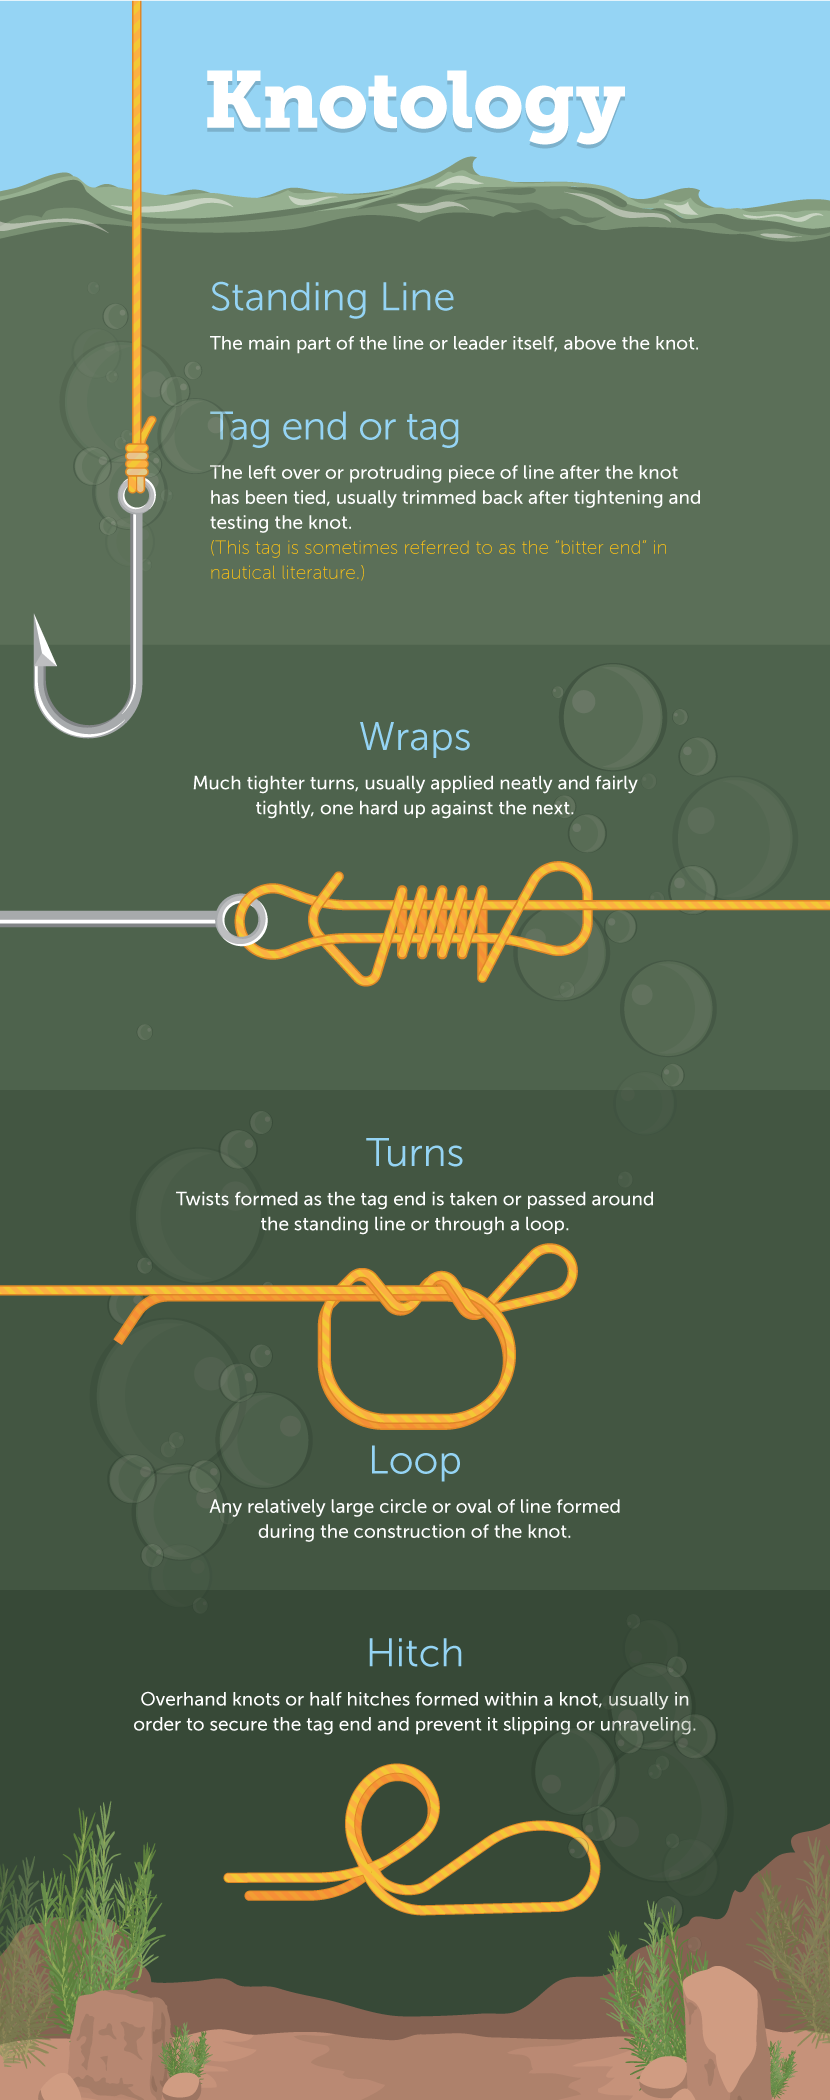 HOW TO TIE FISHING KNOTS PROPERLY AND SECURELY